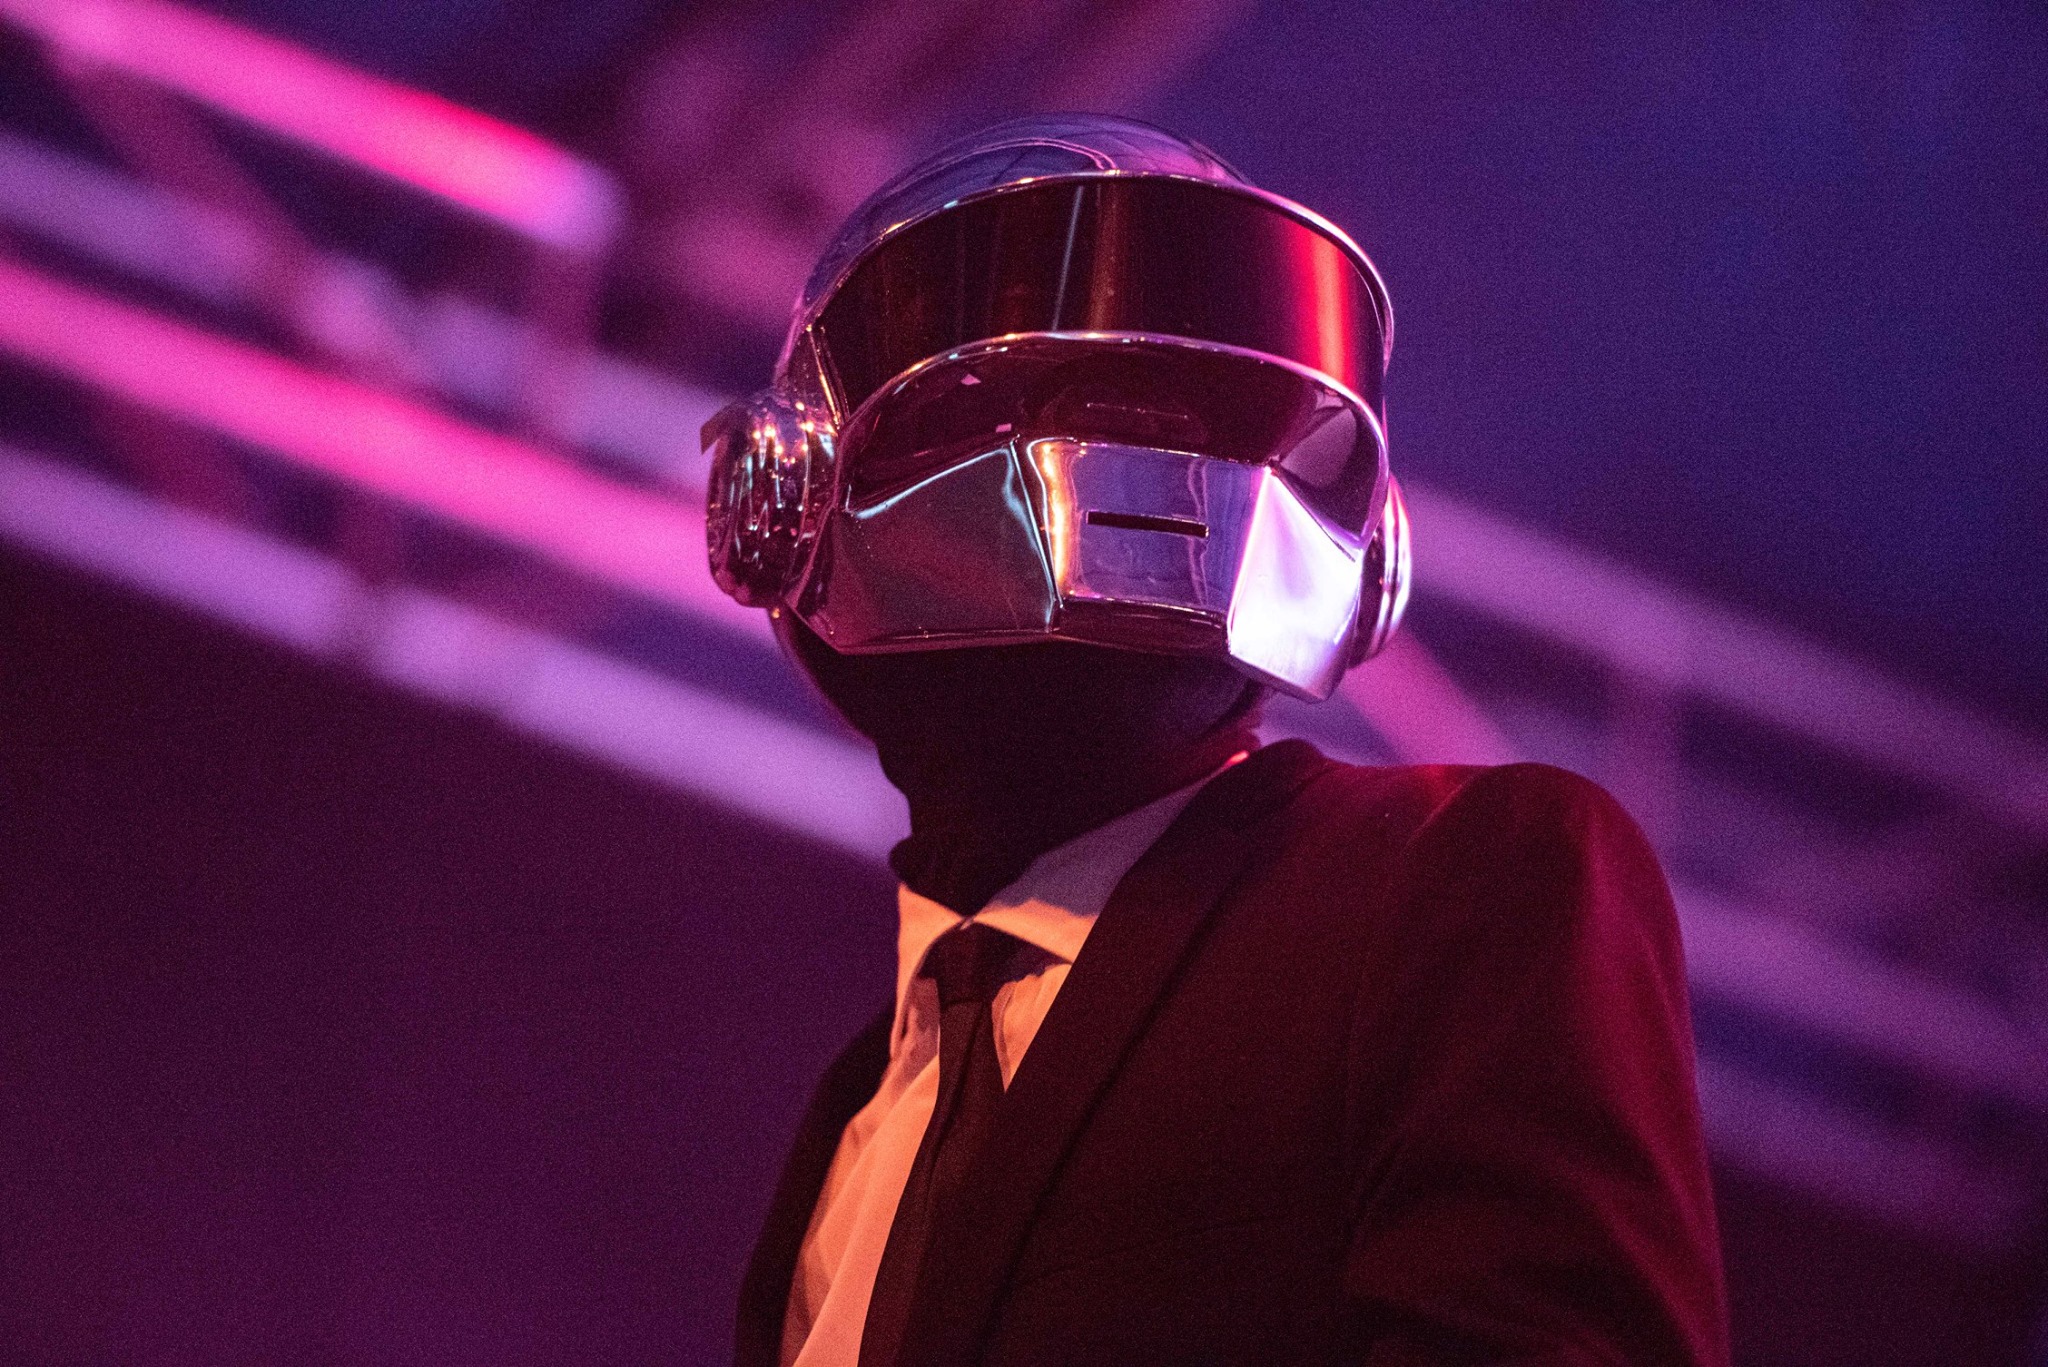 A man dressed in a black suit jacket, white short and black tie has his face hidden within a shiny silver helmet.